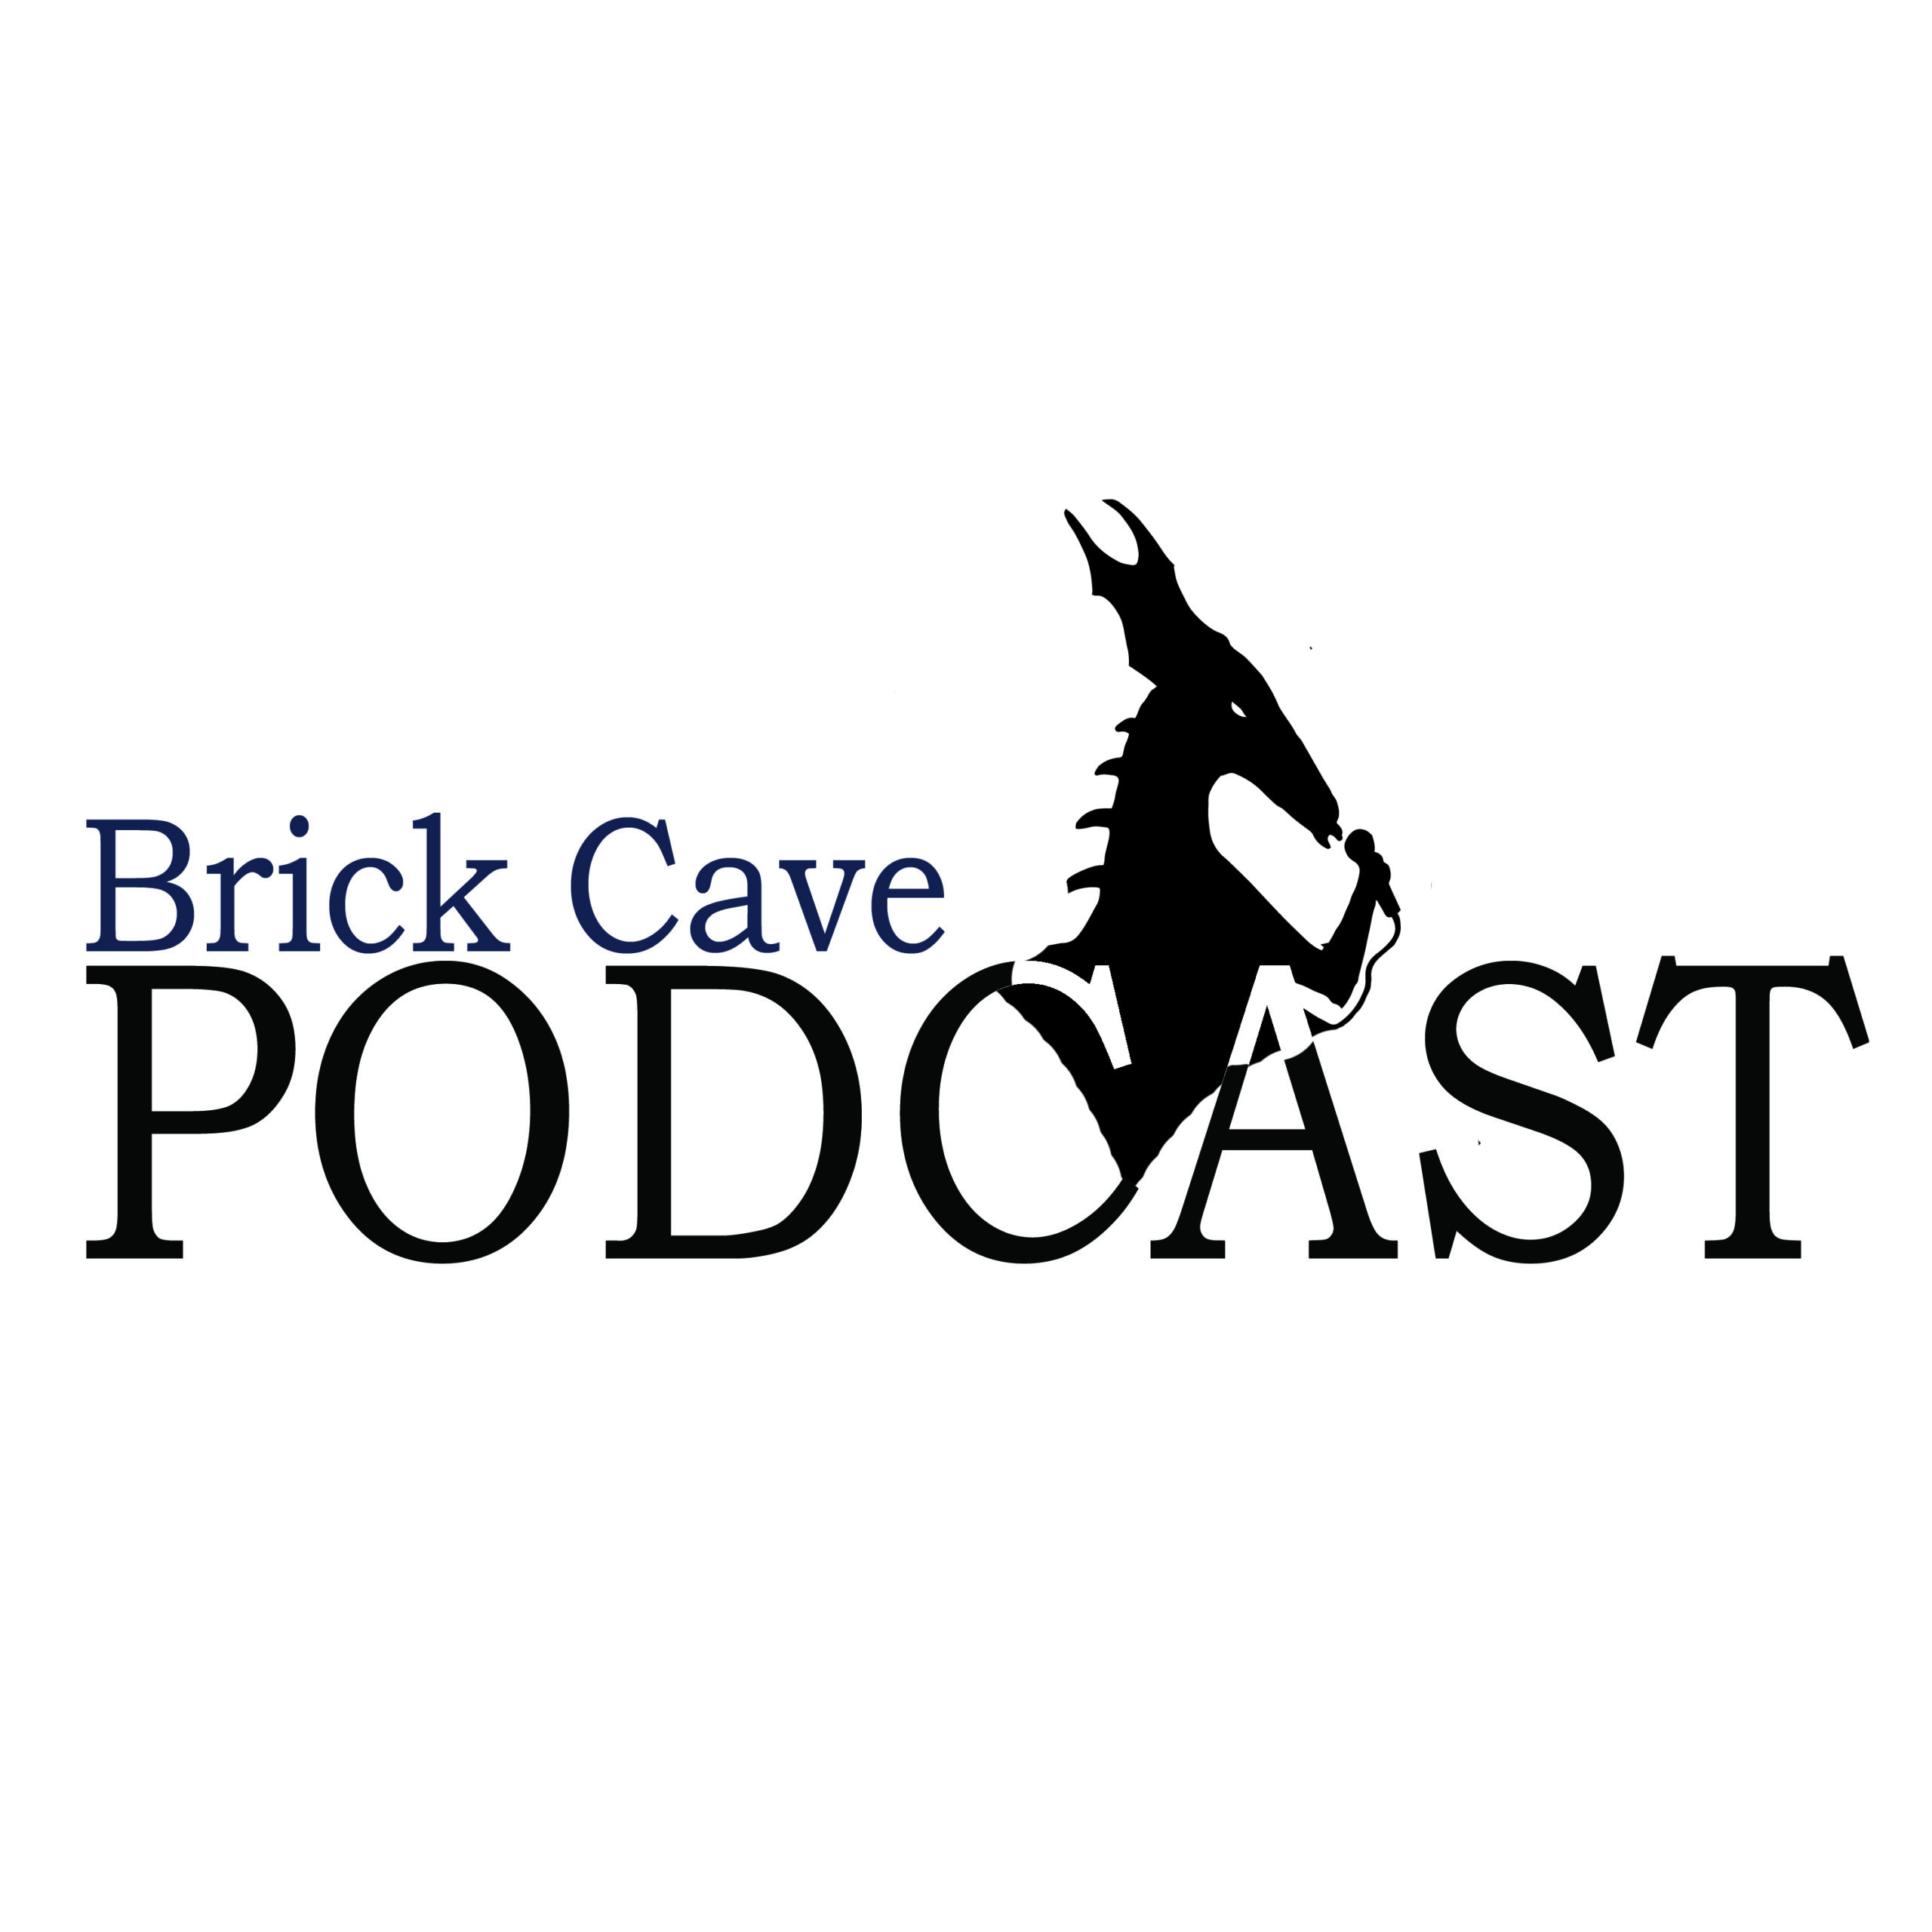 Brick Cave Podcast: Bruce and Sharon on Robots, Zorro and Nerdy Science Rabbit Holes